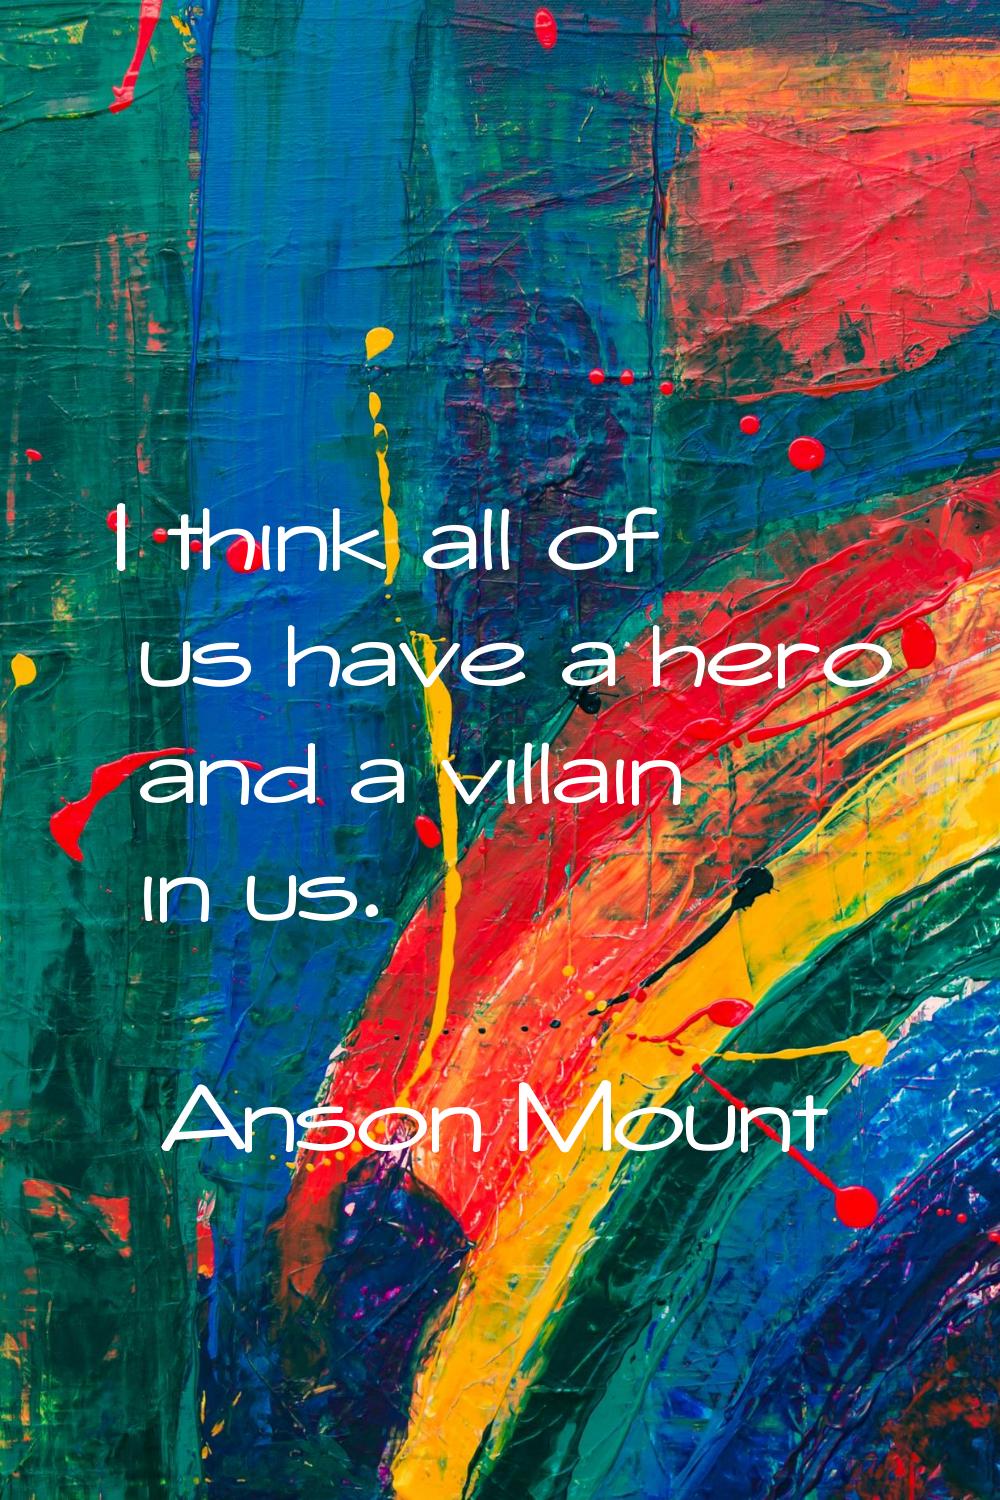 I think all of us have a hero and a villain in us.